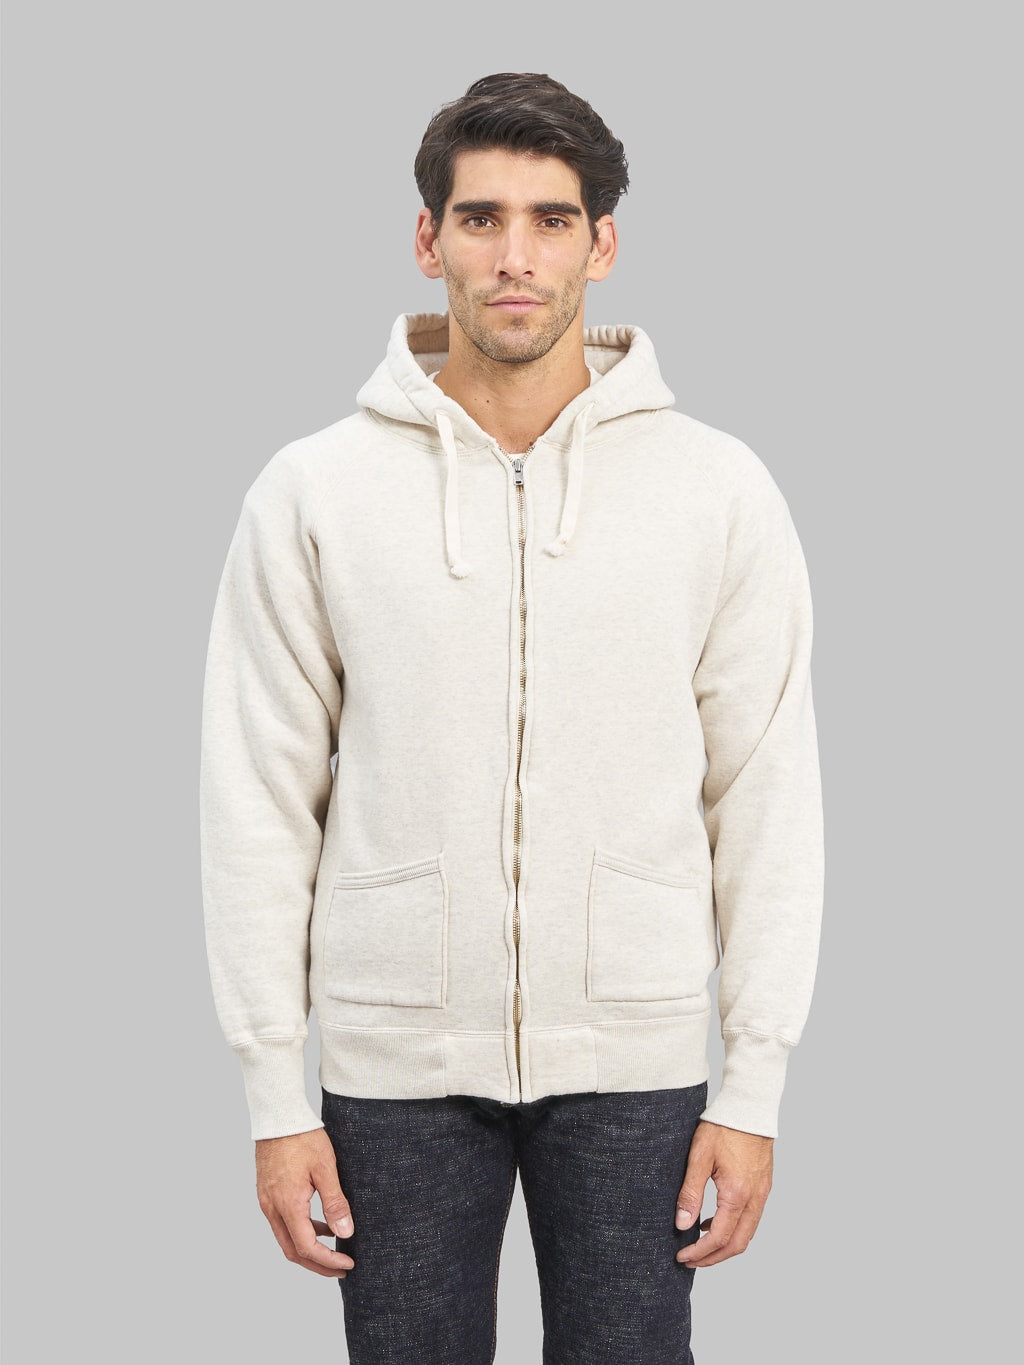 the strike gold zip hoodie oatmeal model front fit